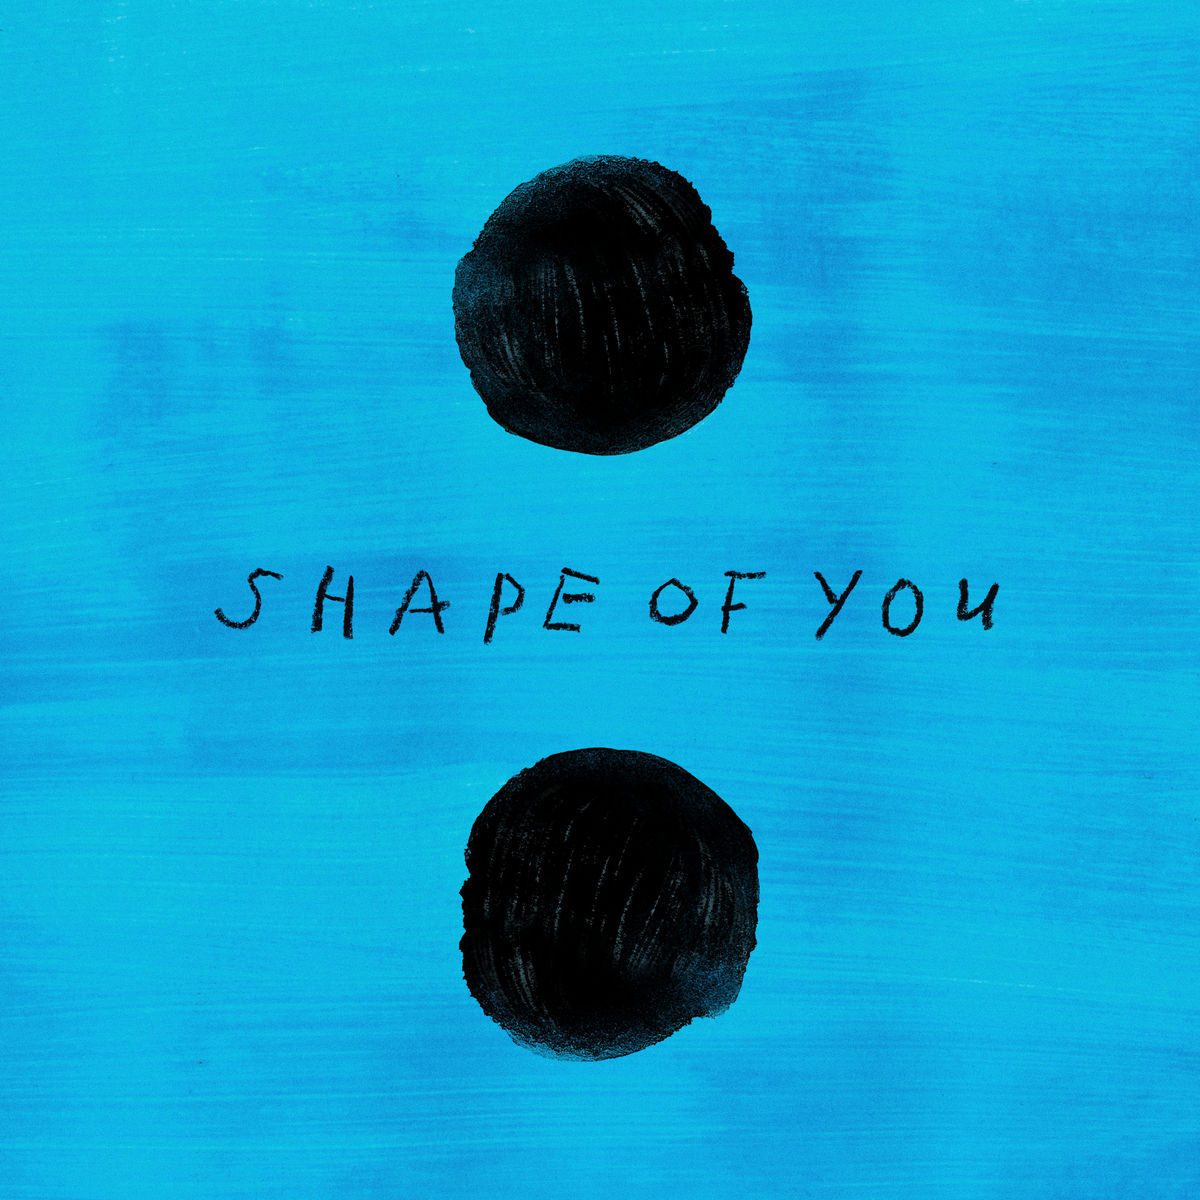 Shape Of You (Stormzy Remix) - Tribute to Ed Sheeran and Stormzy фото 2017 Billboard Masters